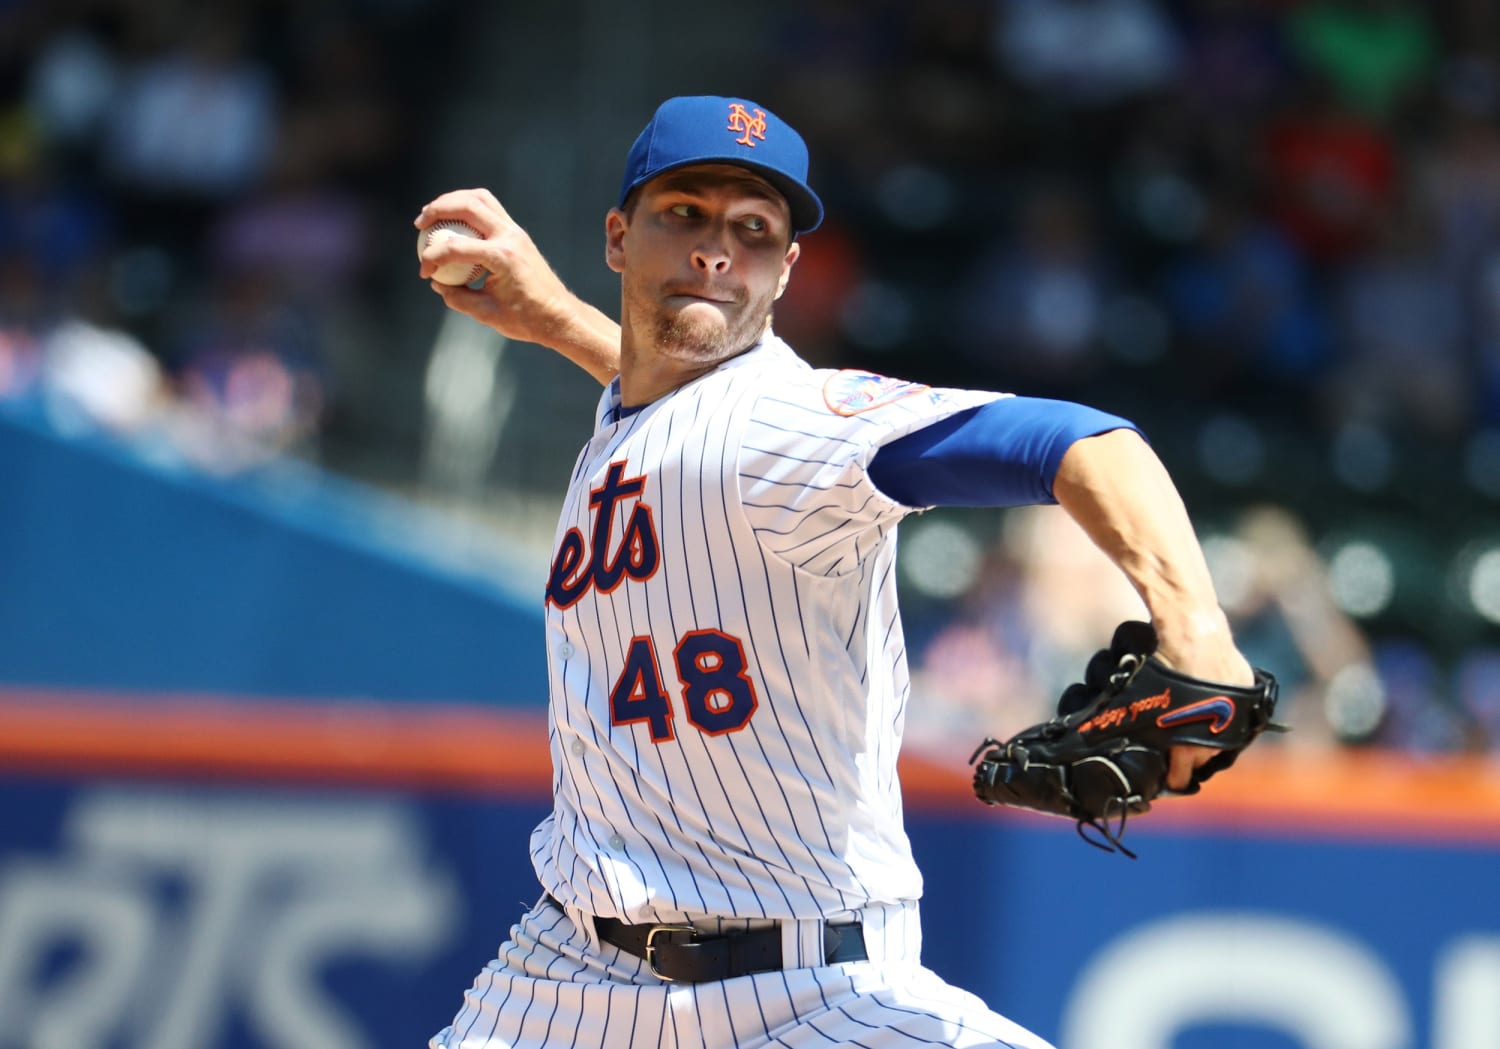 Mets pitcher Jacob deGrom deserves the Cy Young Award. Will his